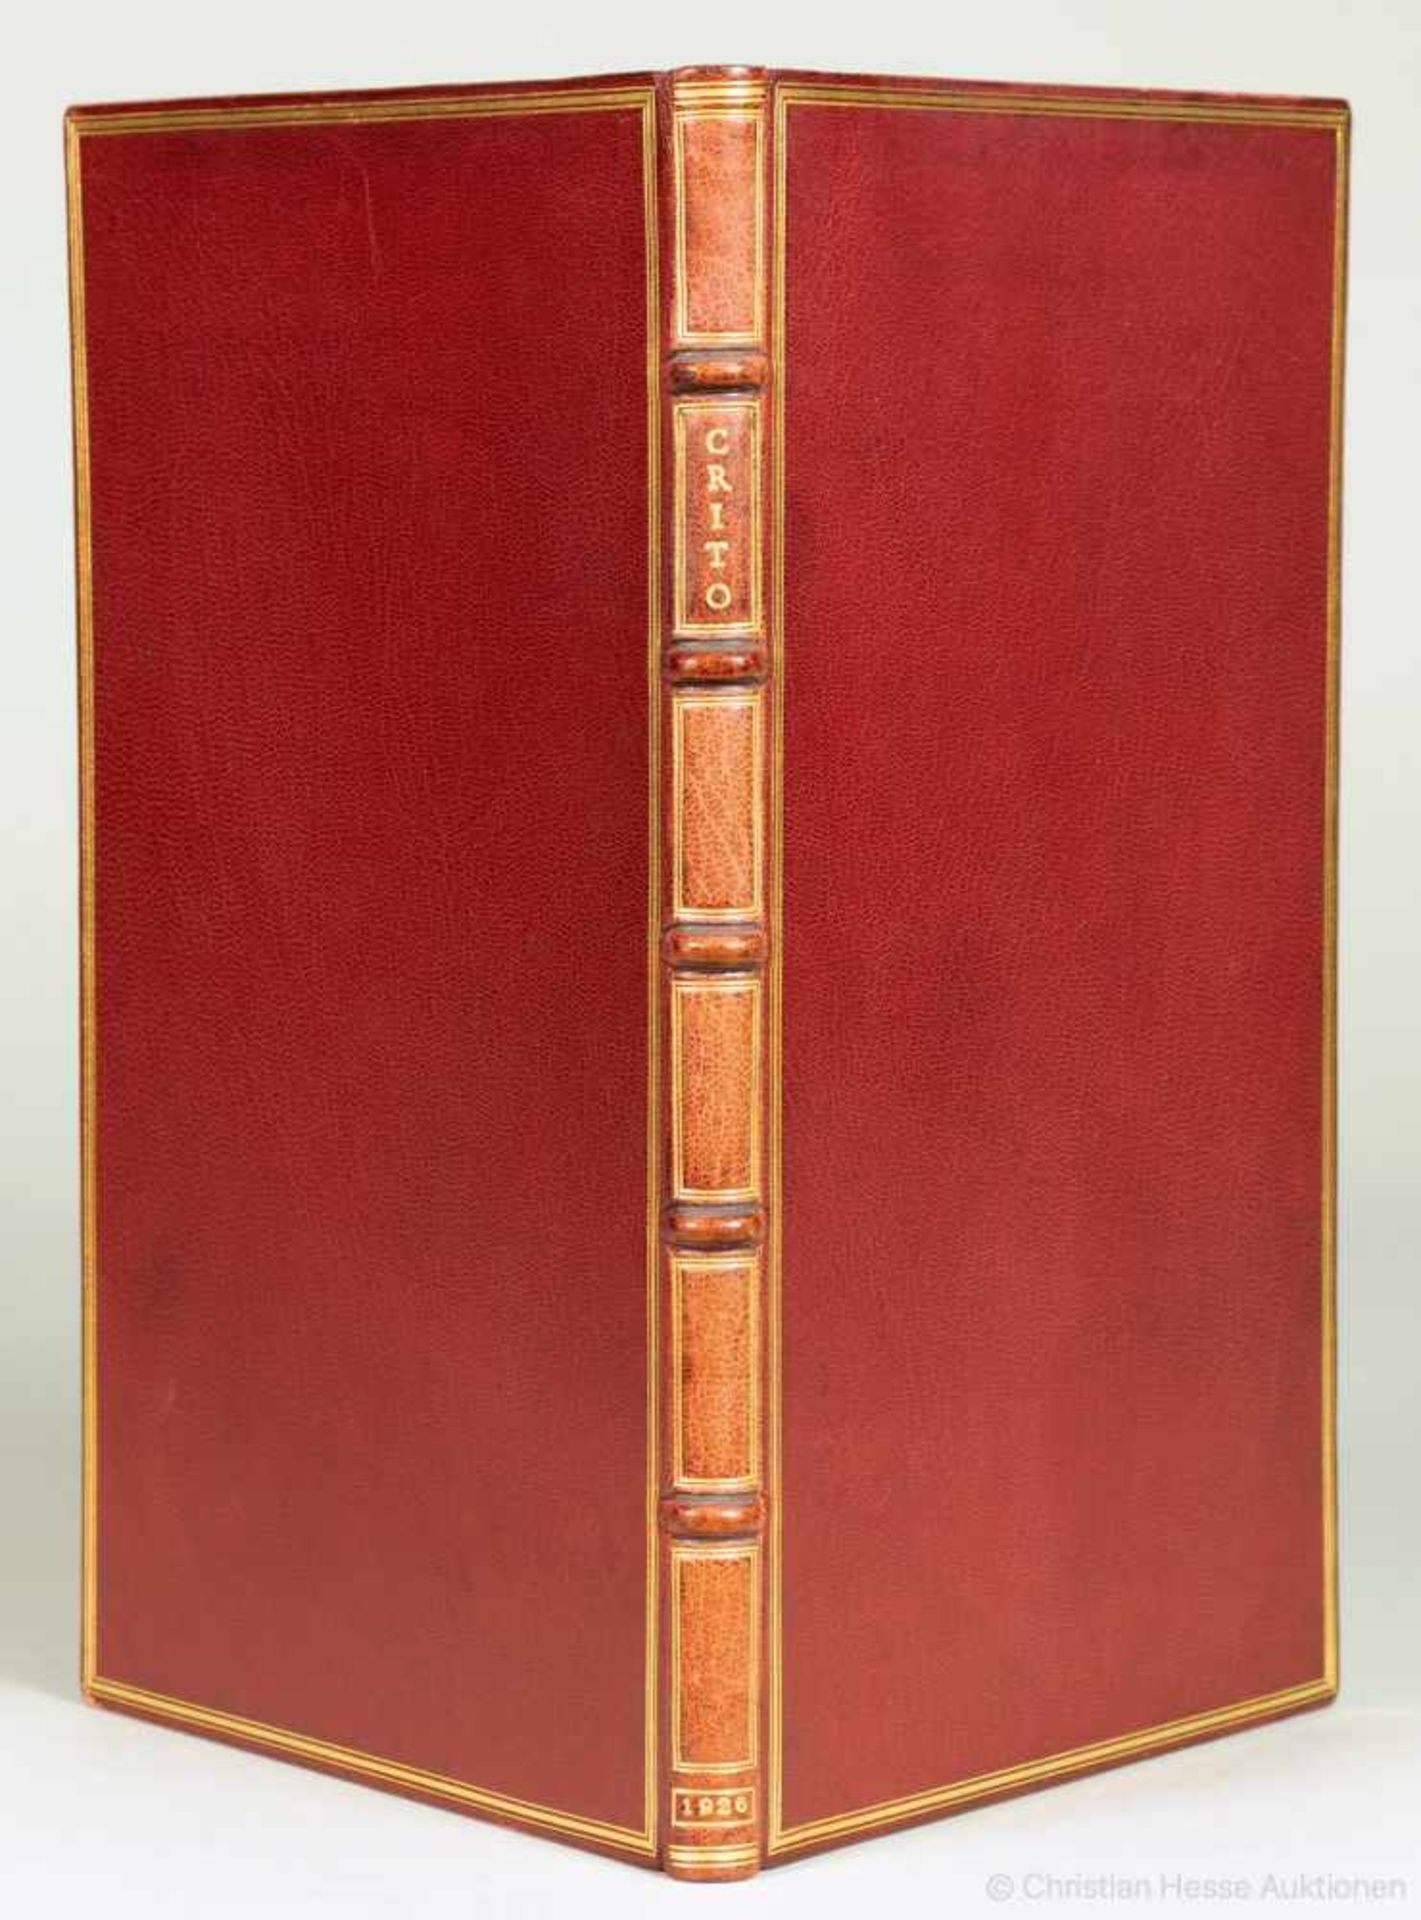 Officina Bodoni - Crito. A Socratic Dialogue by Plato. Translated by Henry Cary. Paris, Pleiad Press